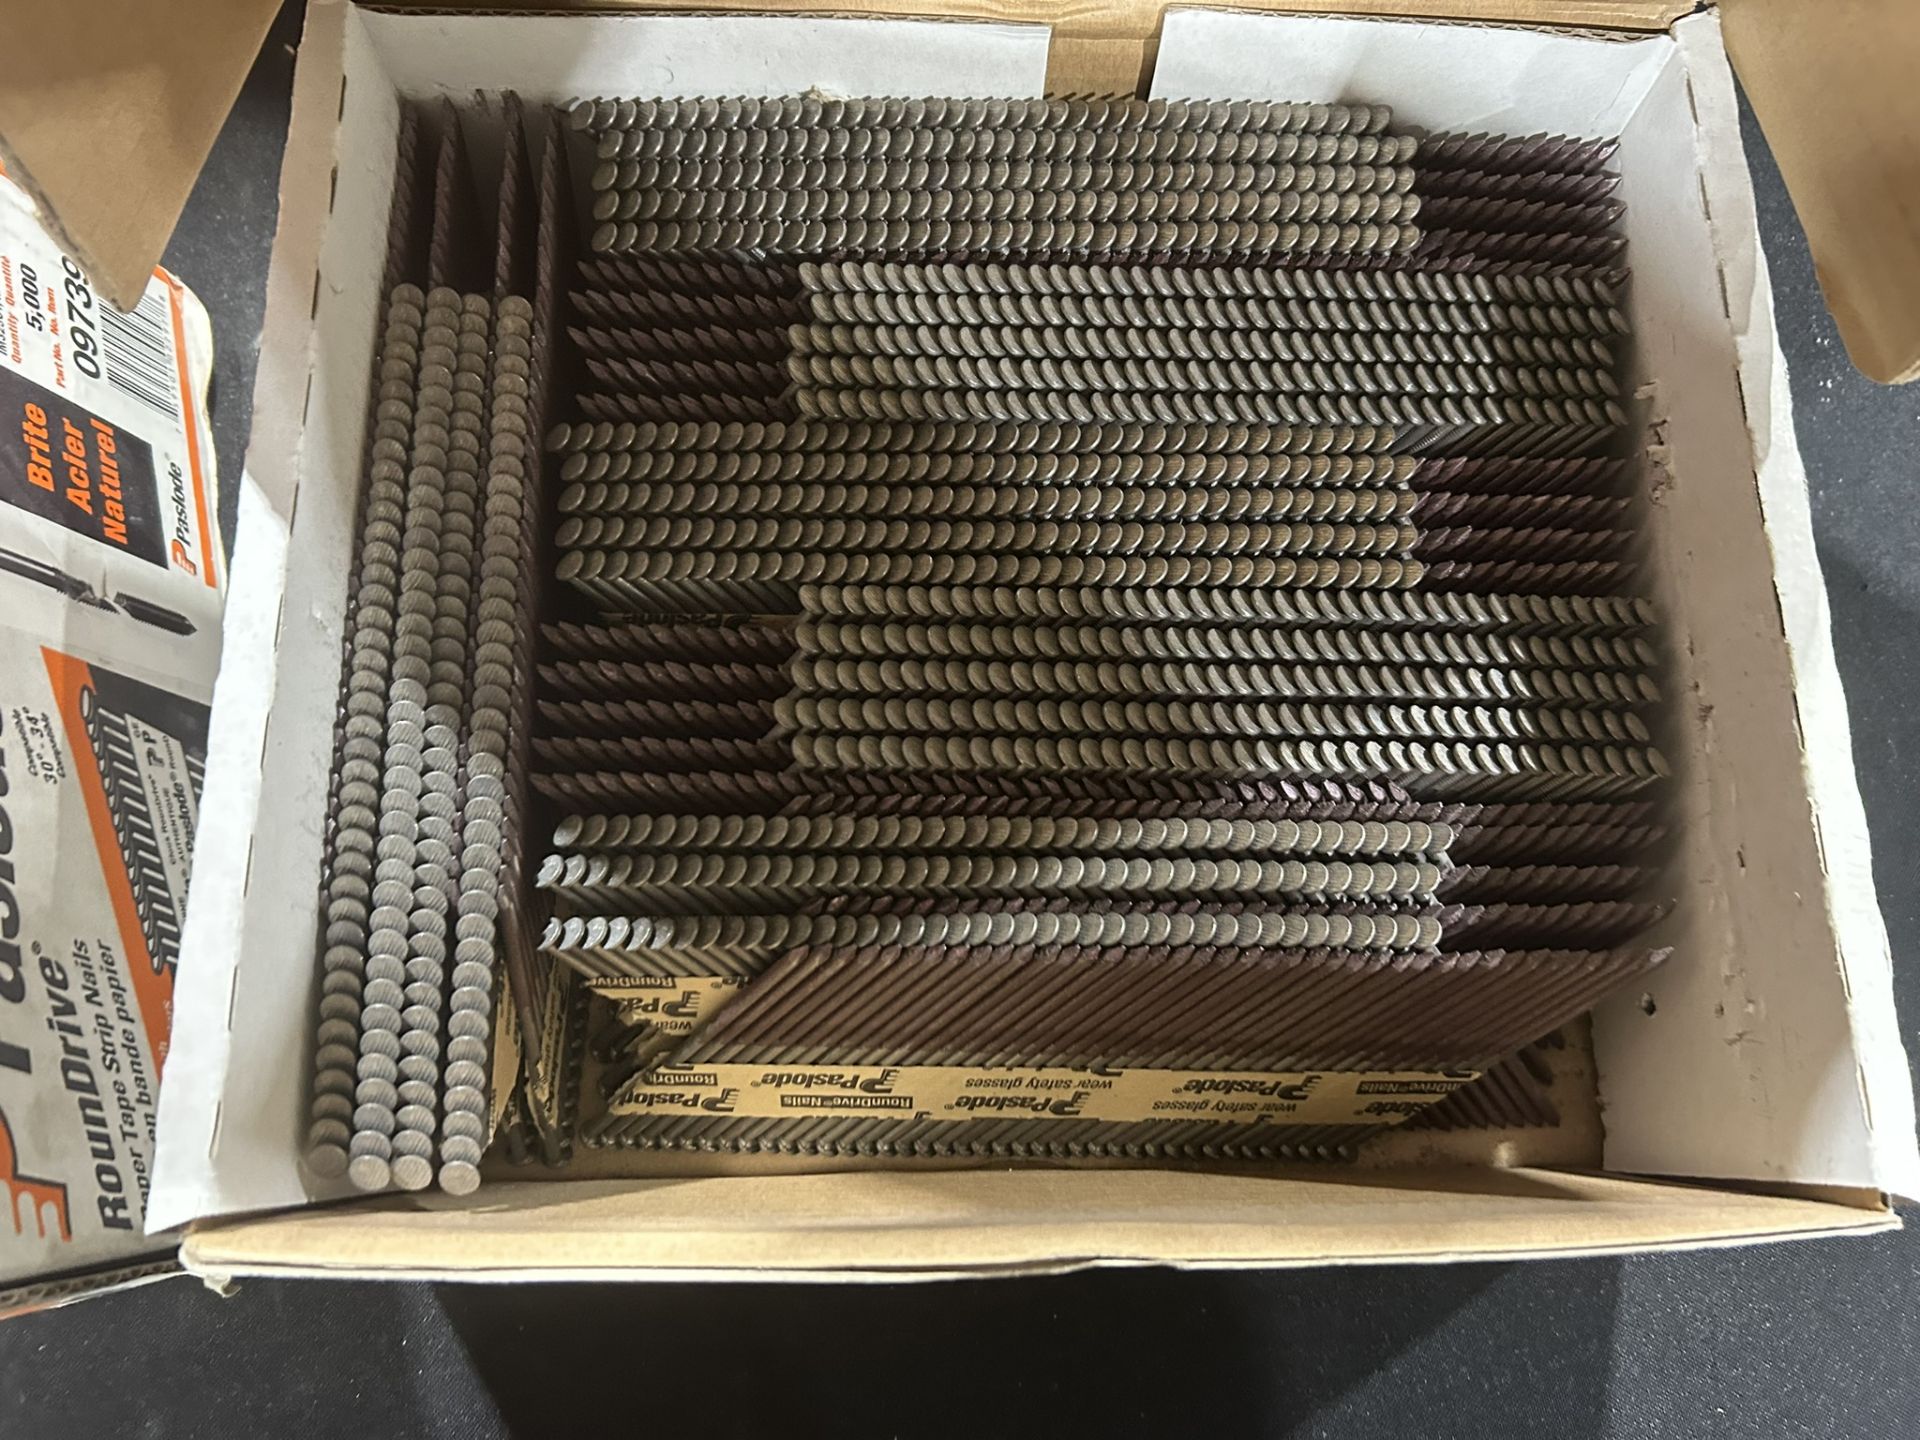 2-BOXES OF PASLODE 3.25" STRIP NAILS - Image 4 of 4